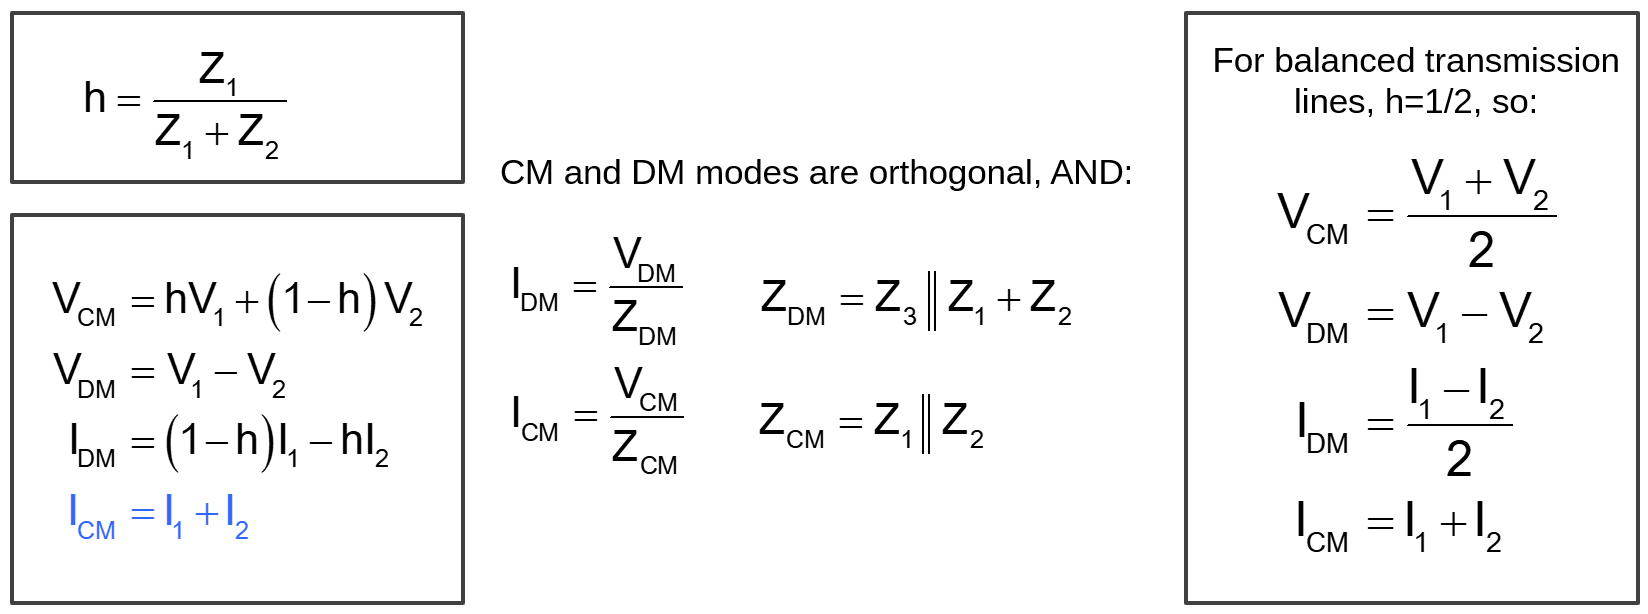 Equations for Common-Mode and Differential-Mode Components